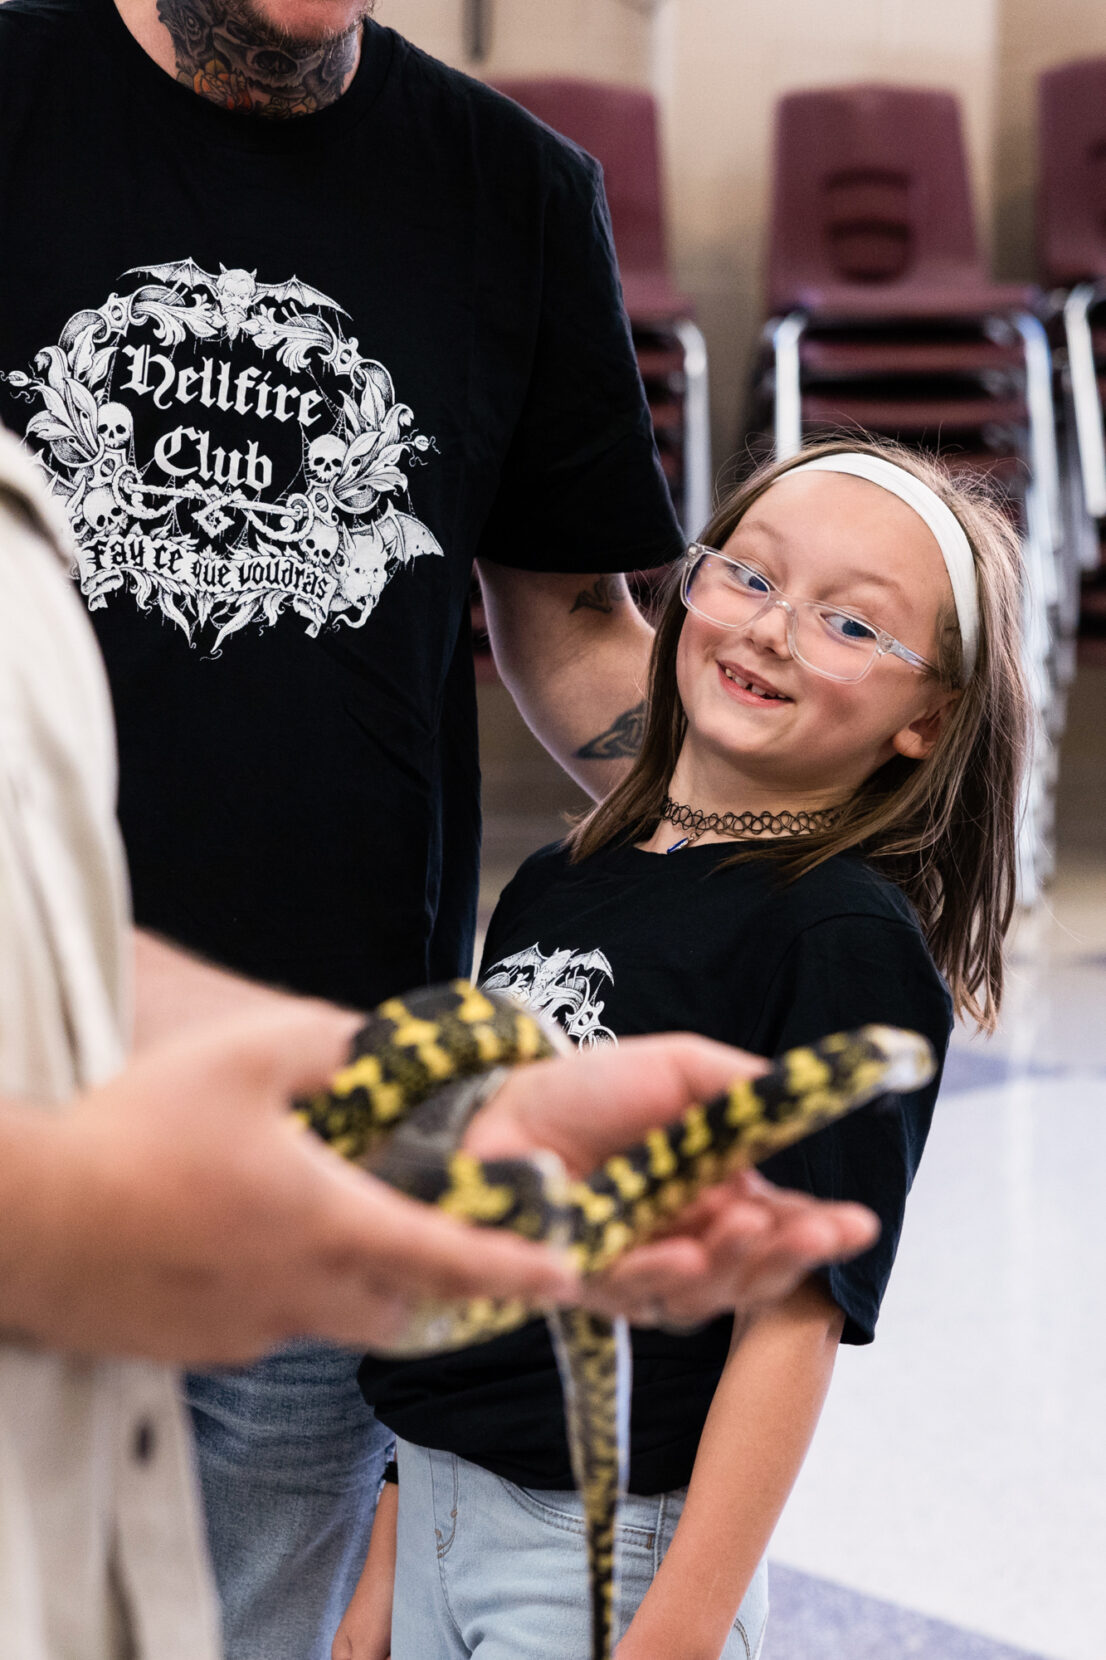 A young girl in a white headband and glasses smiles at a snake being held in the foreground.